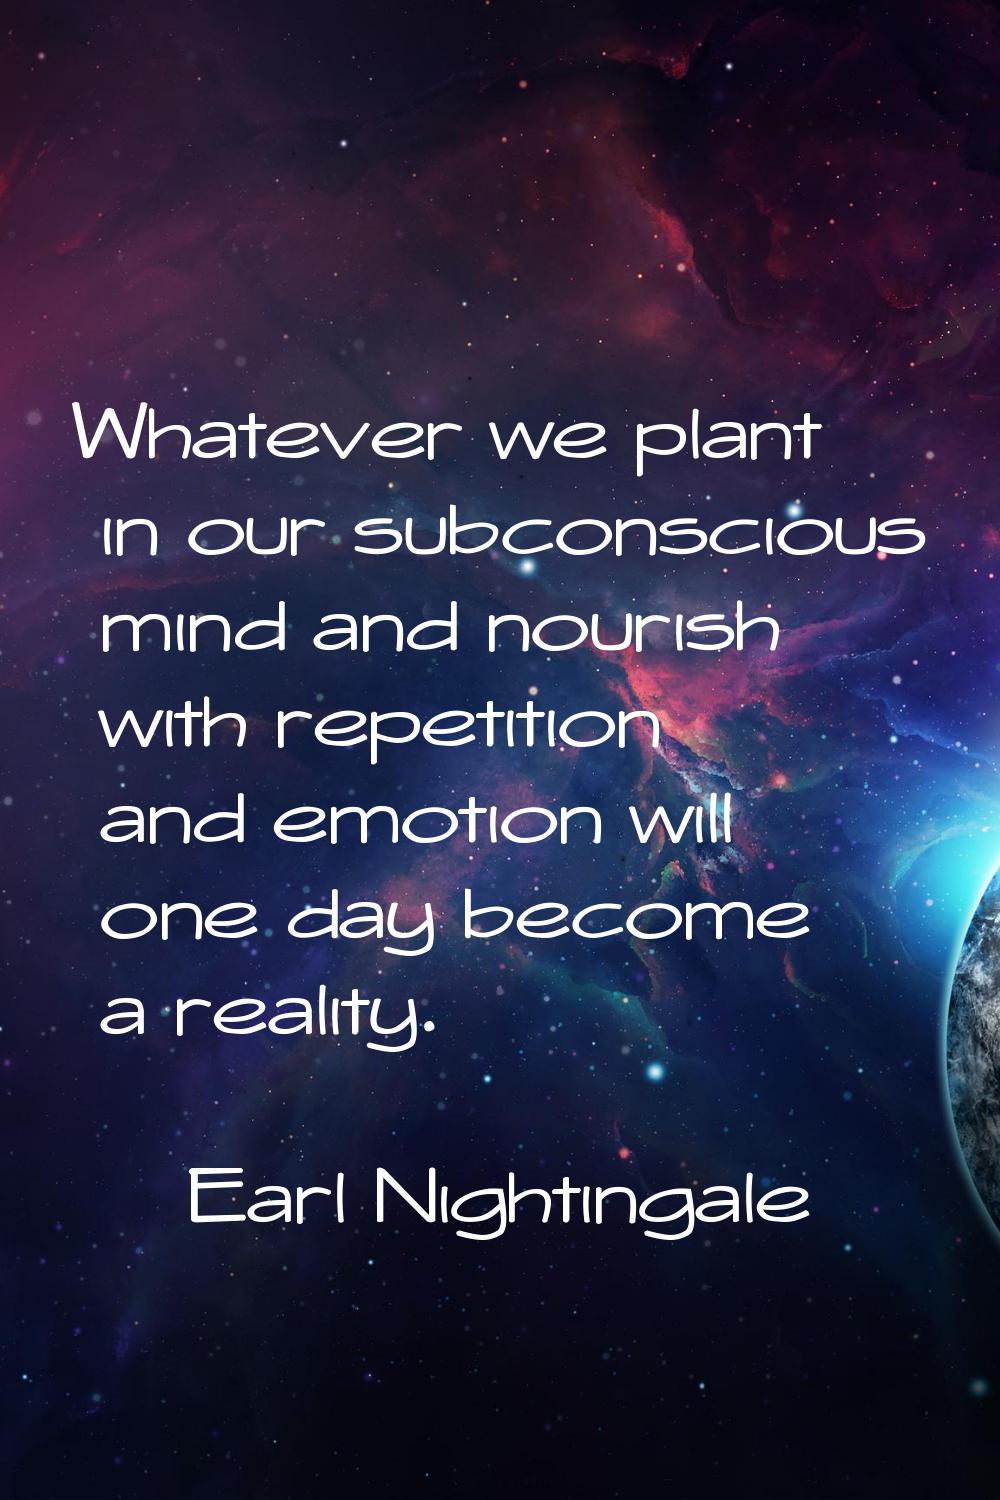 Whatever we plant in our subconscious mind and nourish with repetition and emotion will one day bec